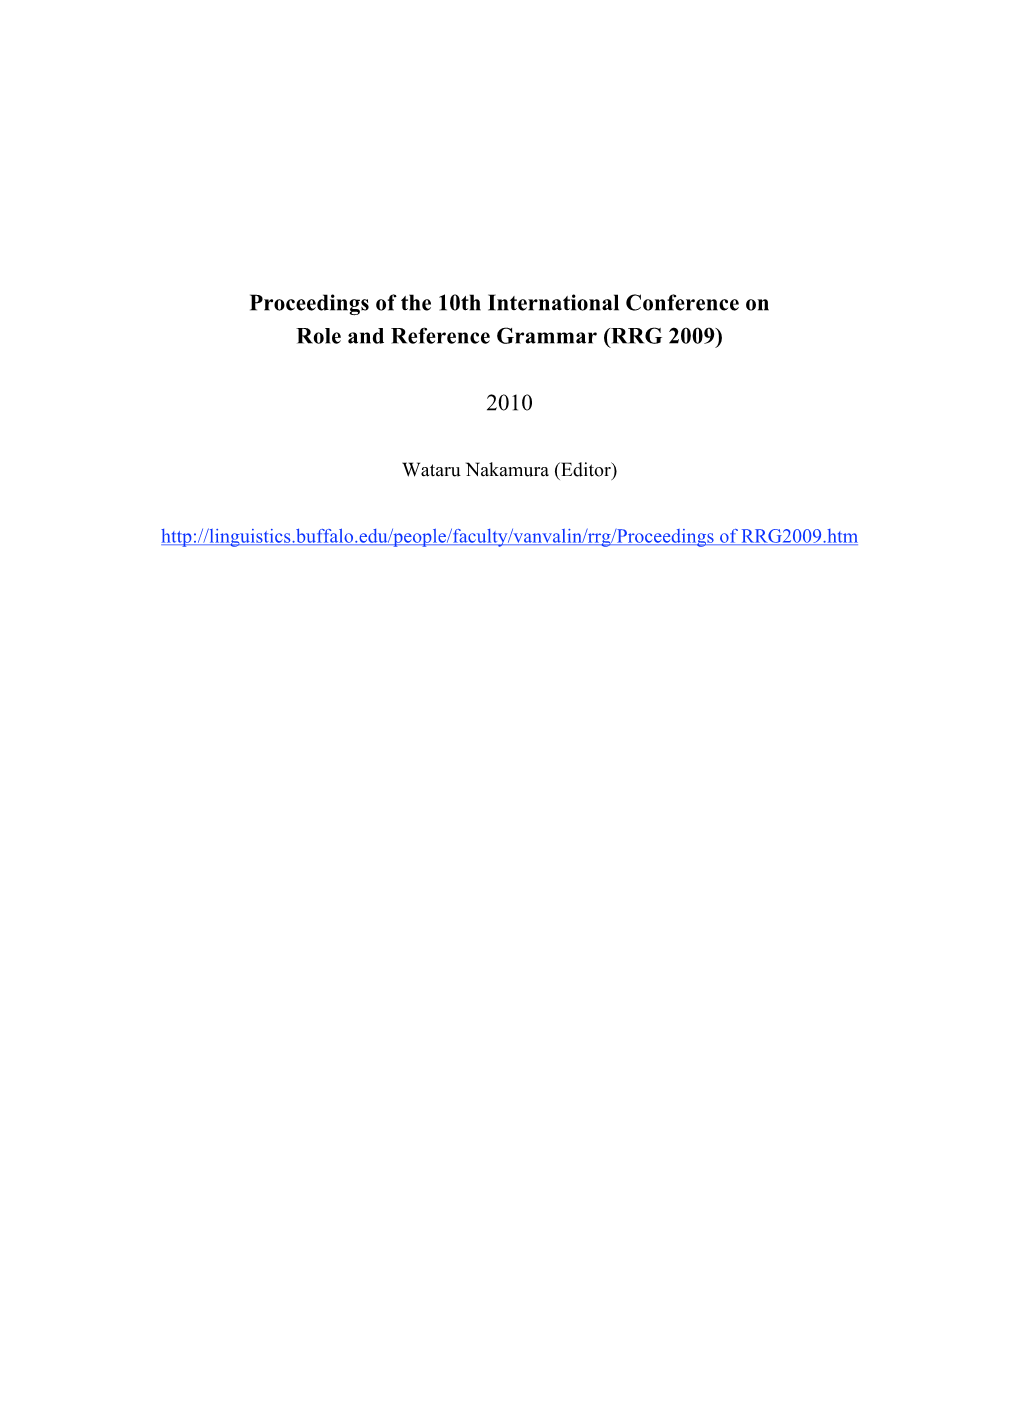 Proceedings of the 10Th International Conference on Role and Reference Grammar (RRG 2009)